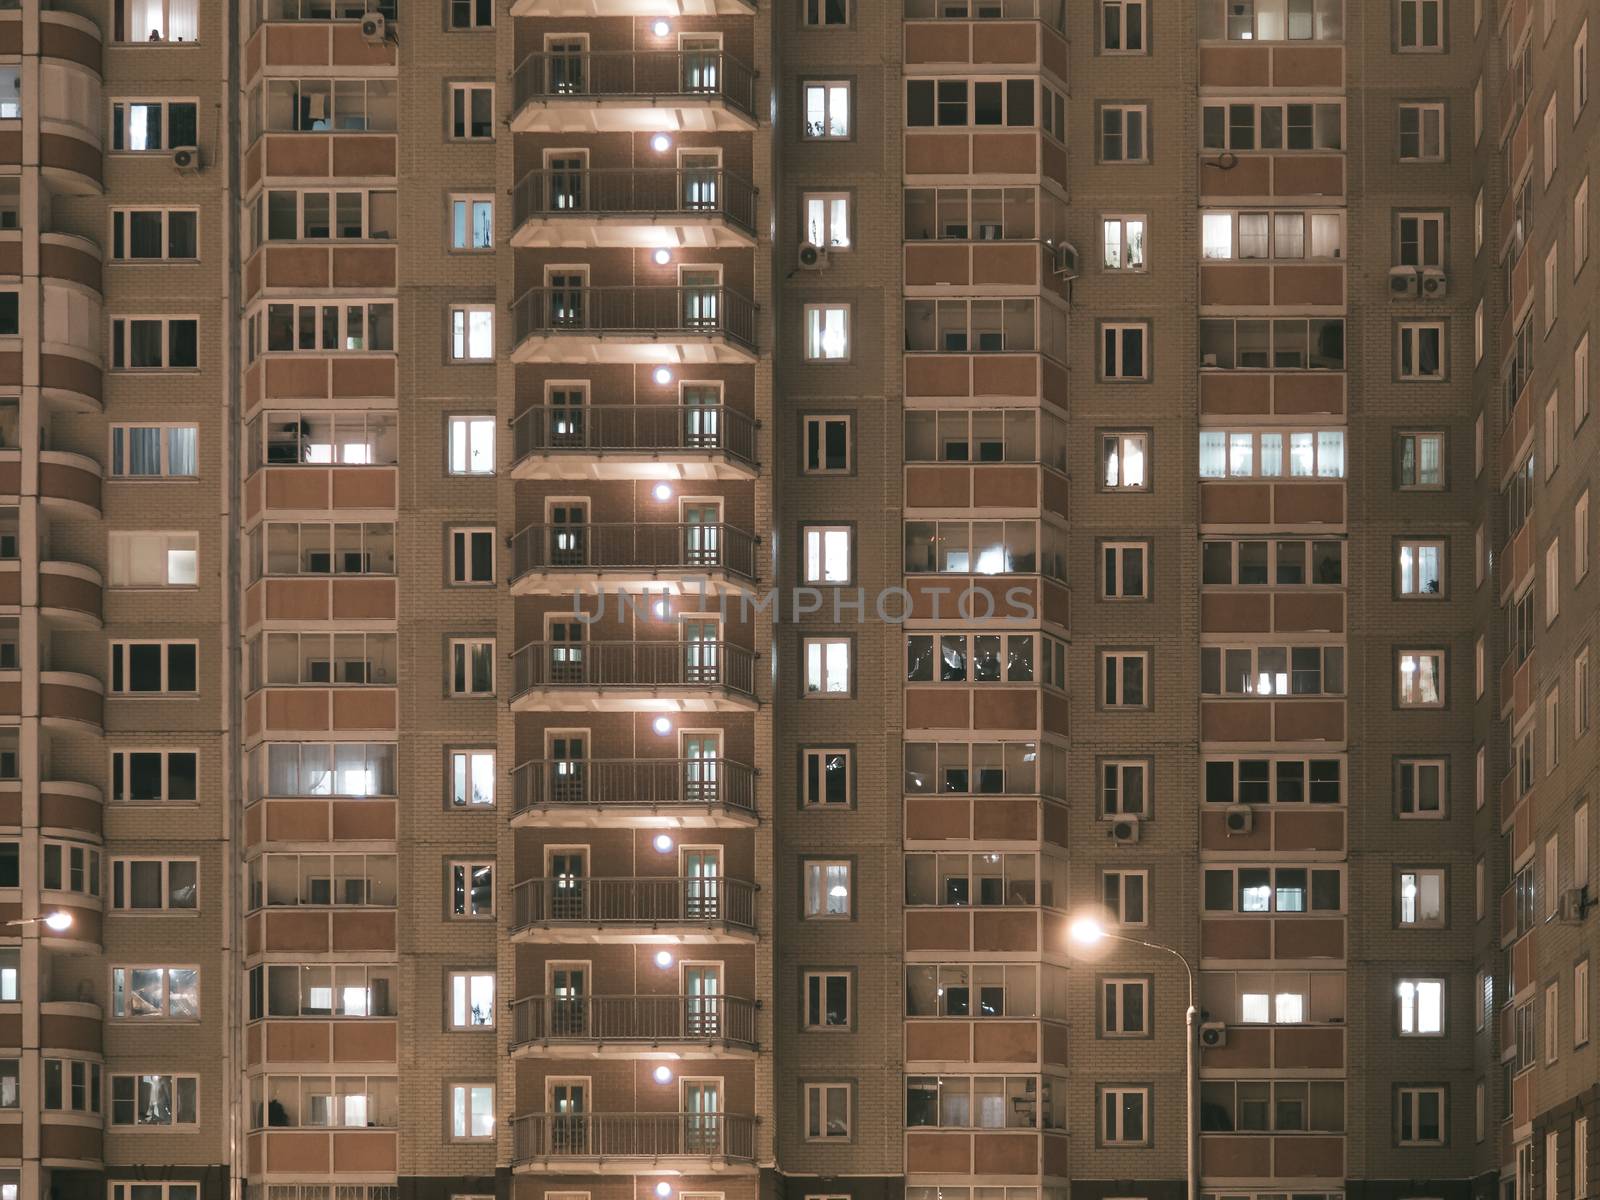 Night view of exterior apartment building. High rise apartments in night light